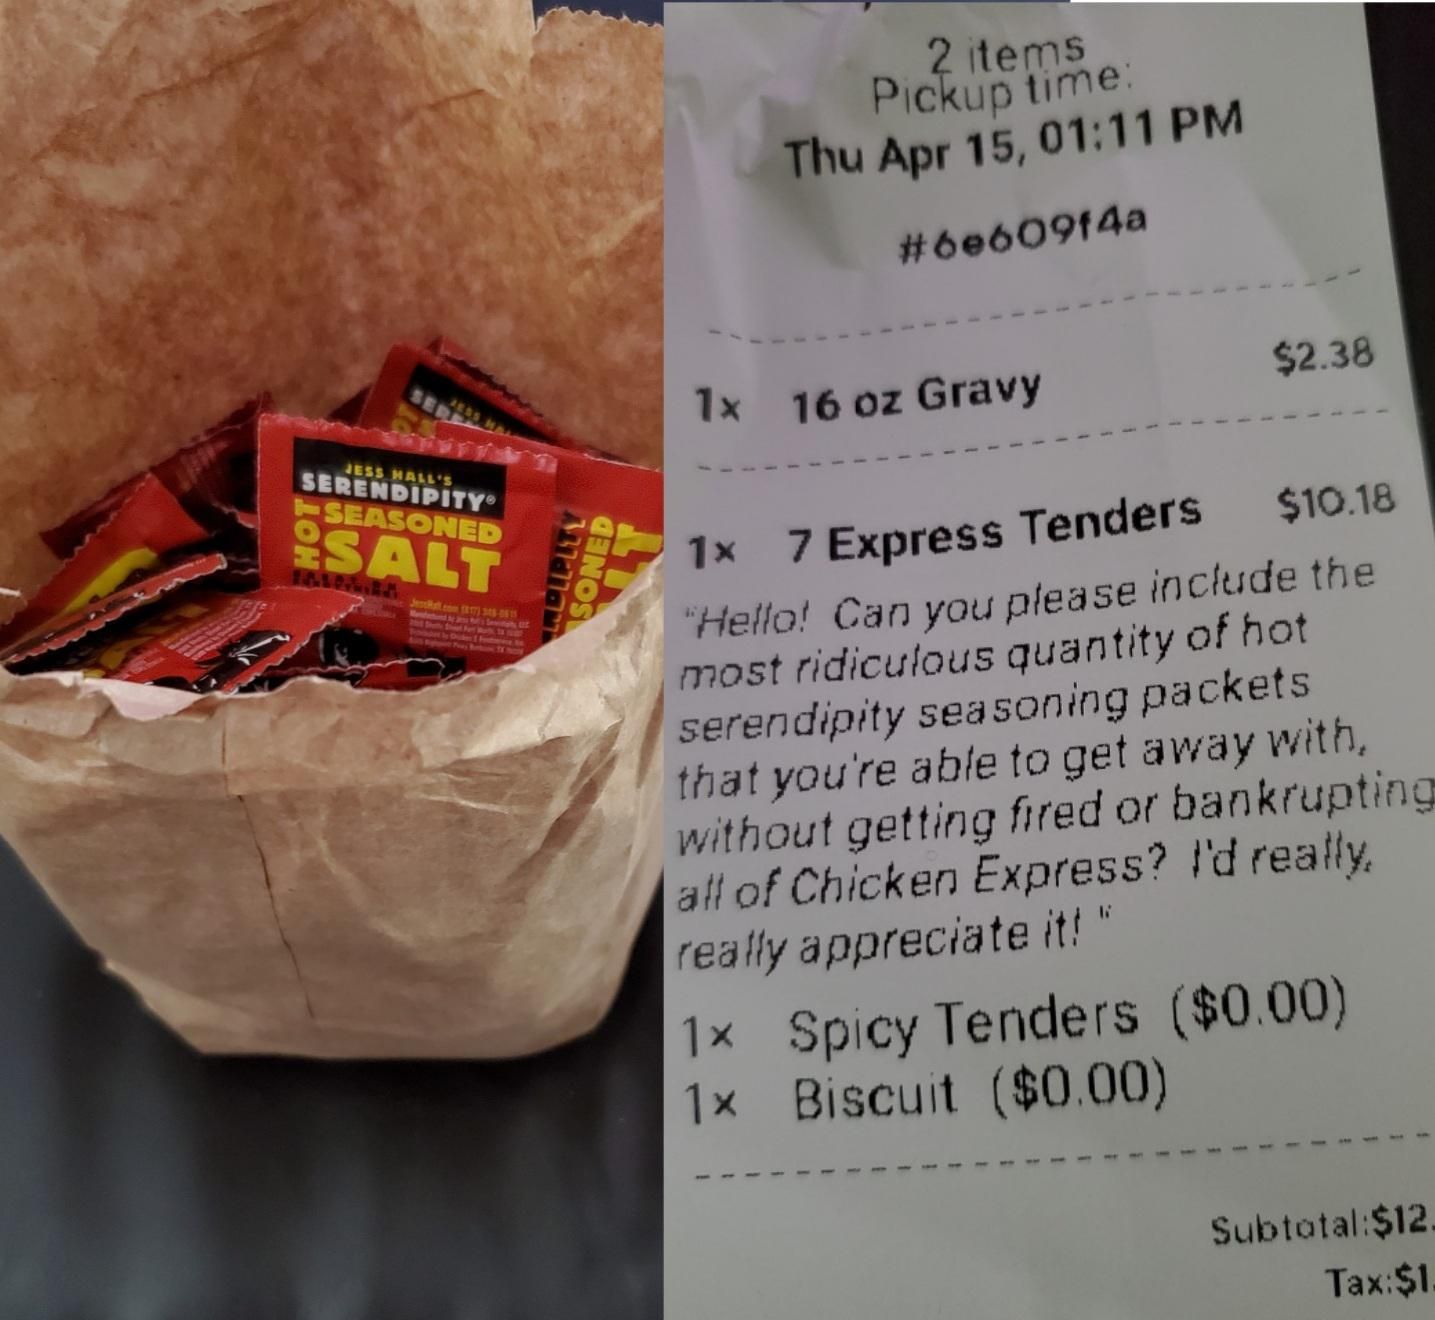 I asked for a ridiculous quantity of a seasoning that I like with my doordash order, and I wasn't at all disappointed by the glorious human being that fulfilled my request.